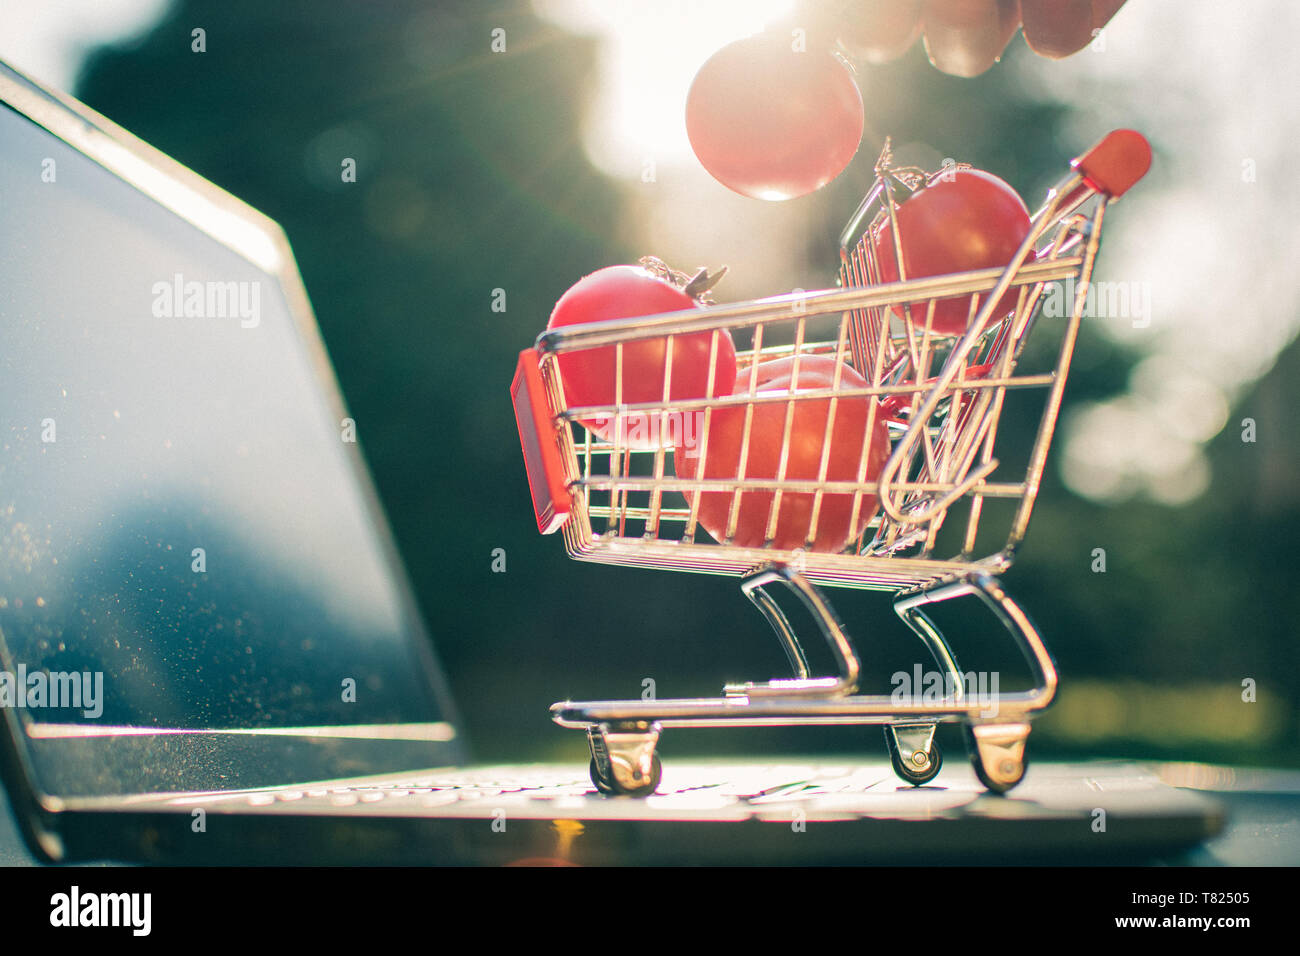 Concept of online grocery shopping. A miniature shopping cart with tomatoes is standing an a Notebook. Stock Photo